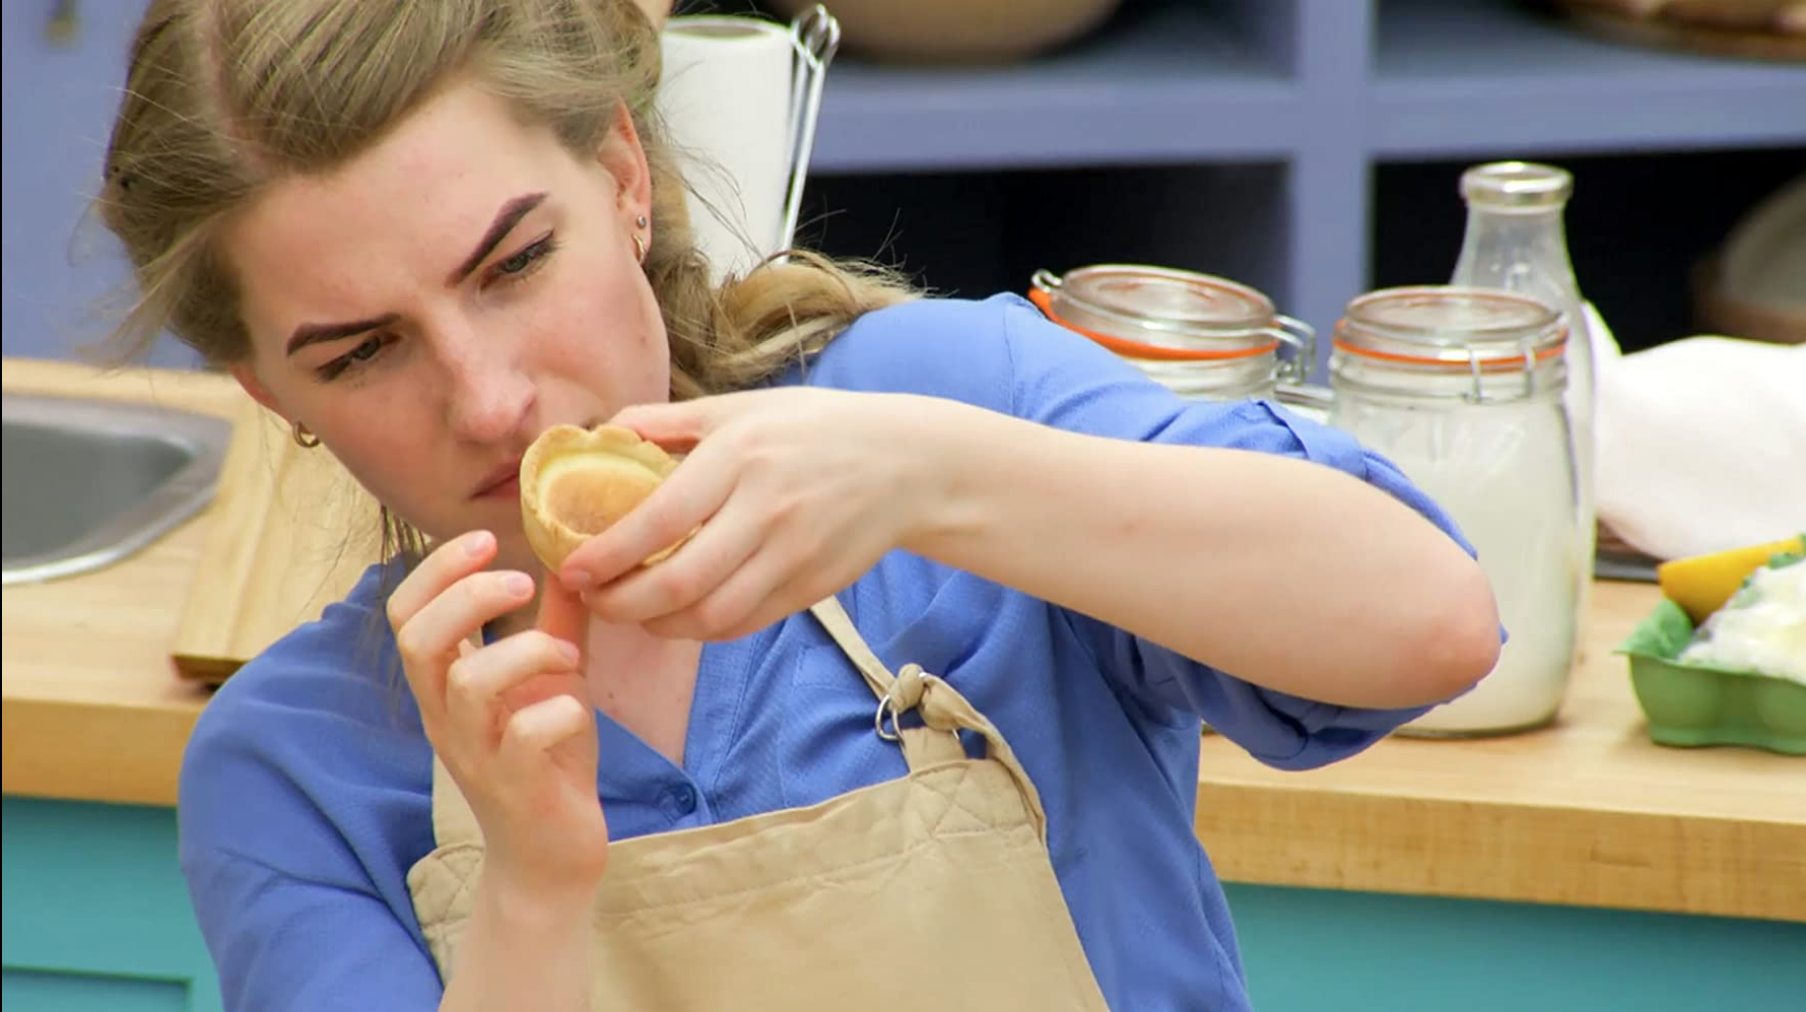 9 Strict Rules You Never Knew Baking Show Contestants Have to Follow